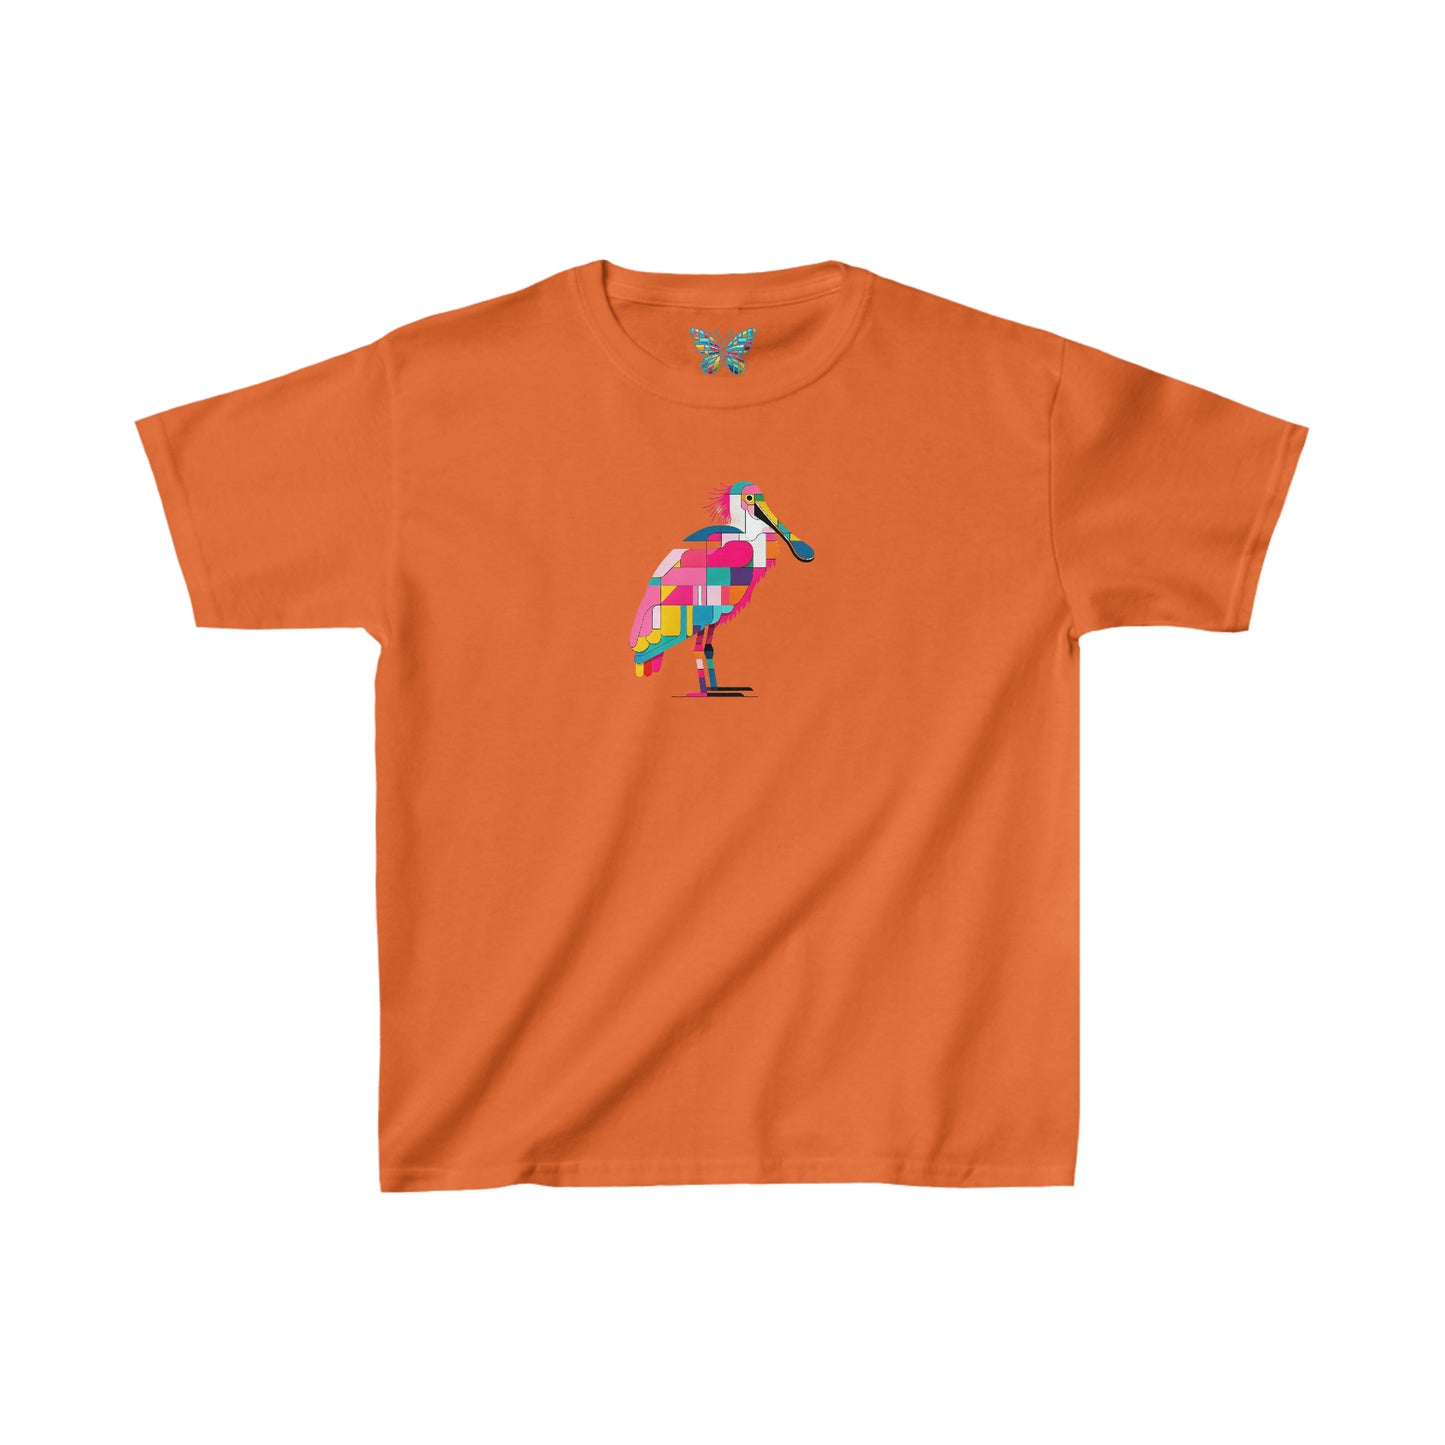 Roseate Spoonbill Jollivex - Youth - Snazzle Tee